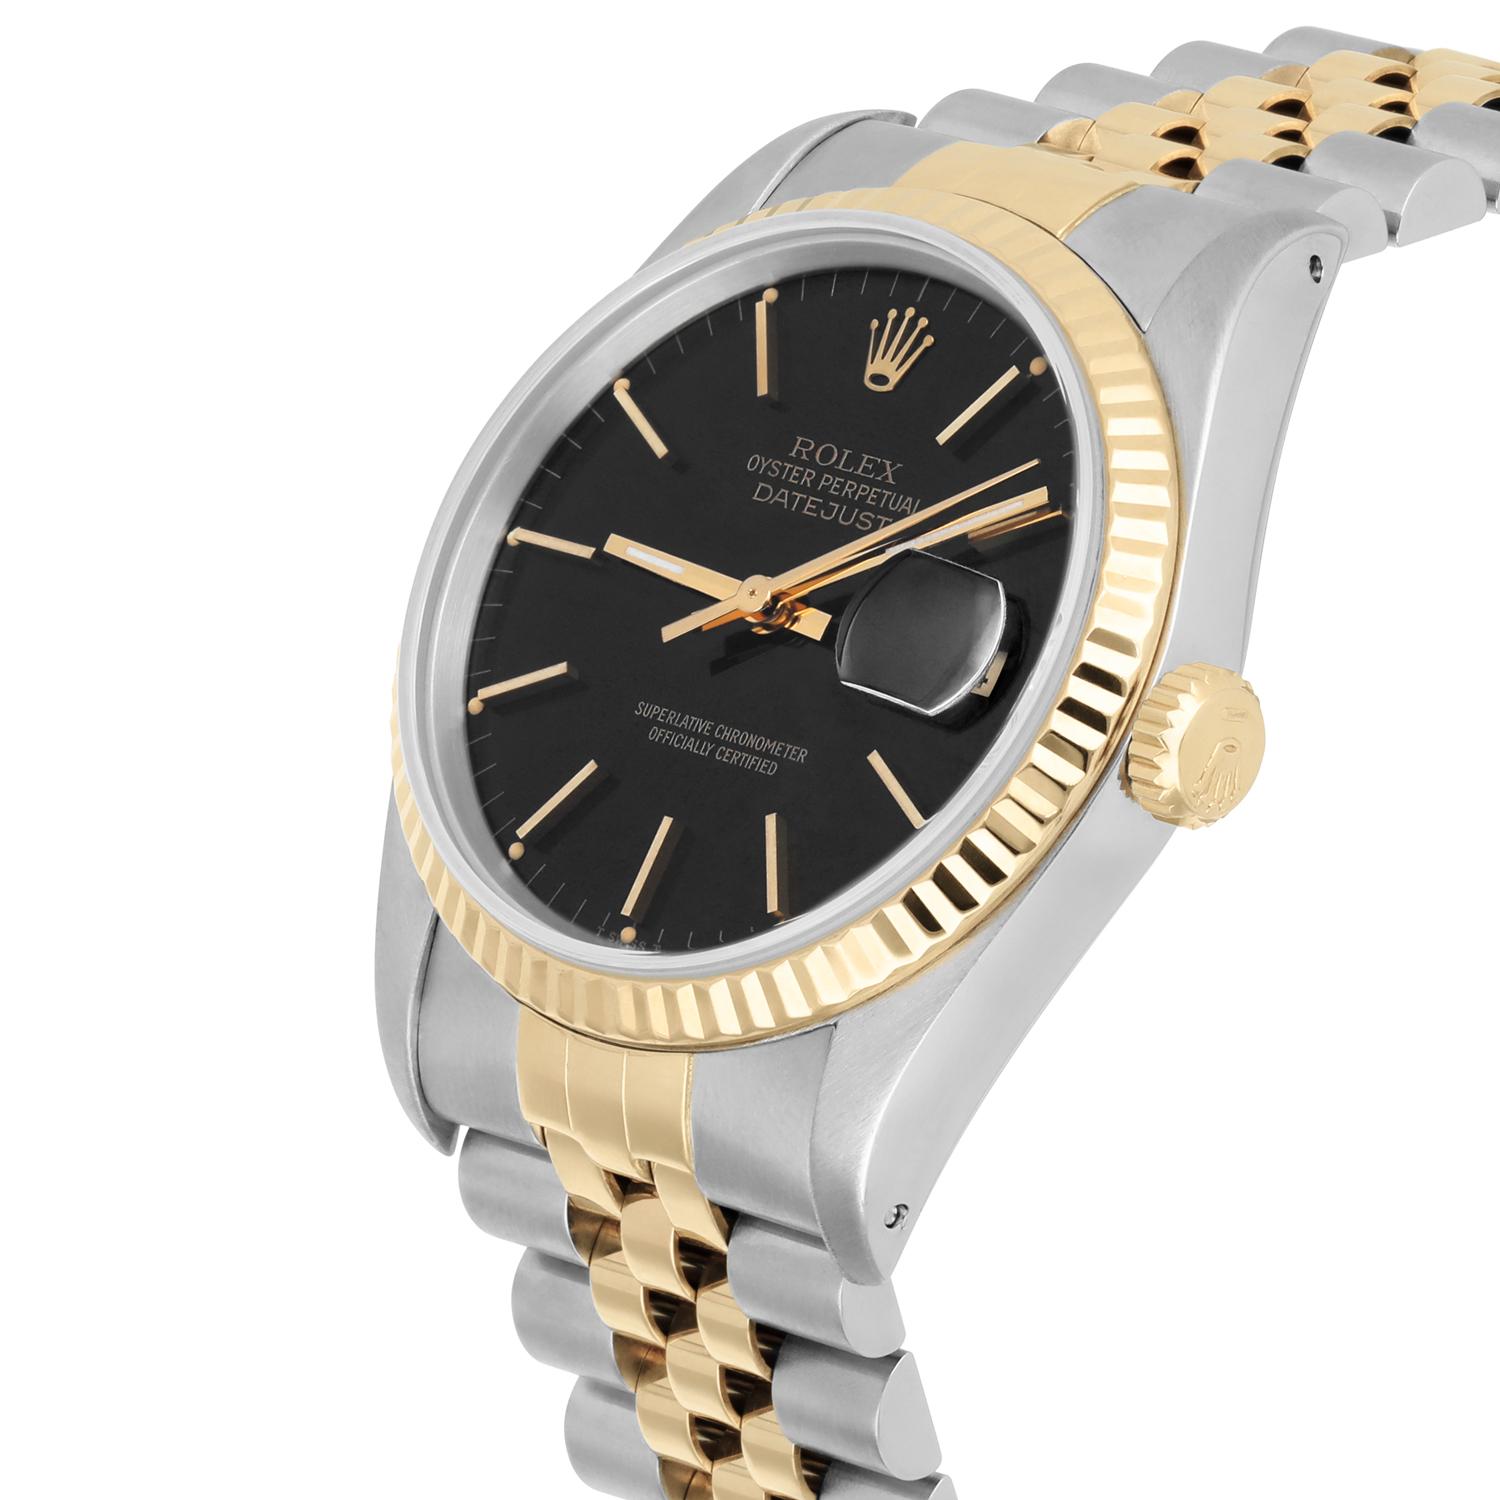 Rolex Datejust 36mm Two Tone Black Index Dial Jubilee 16233 Circa 1993 In Excellent Condition For Sale In New York, NY